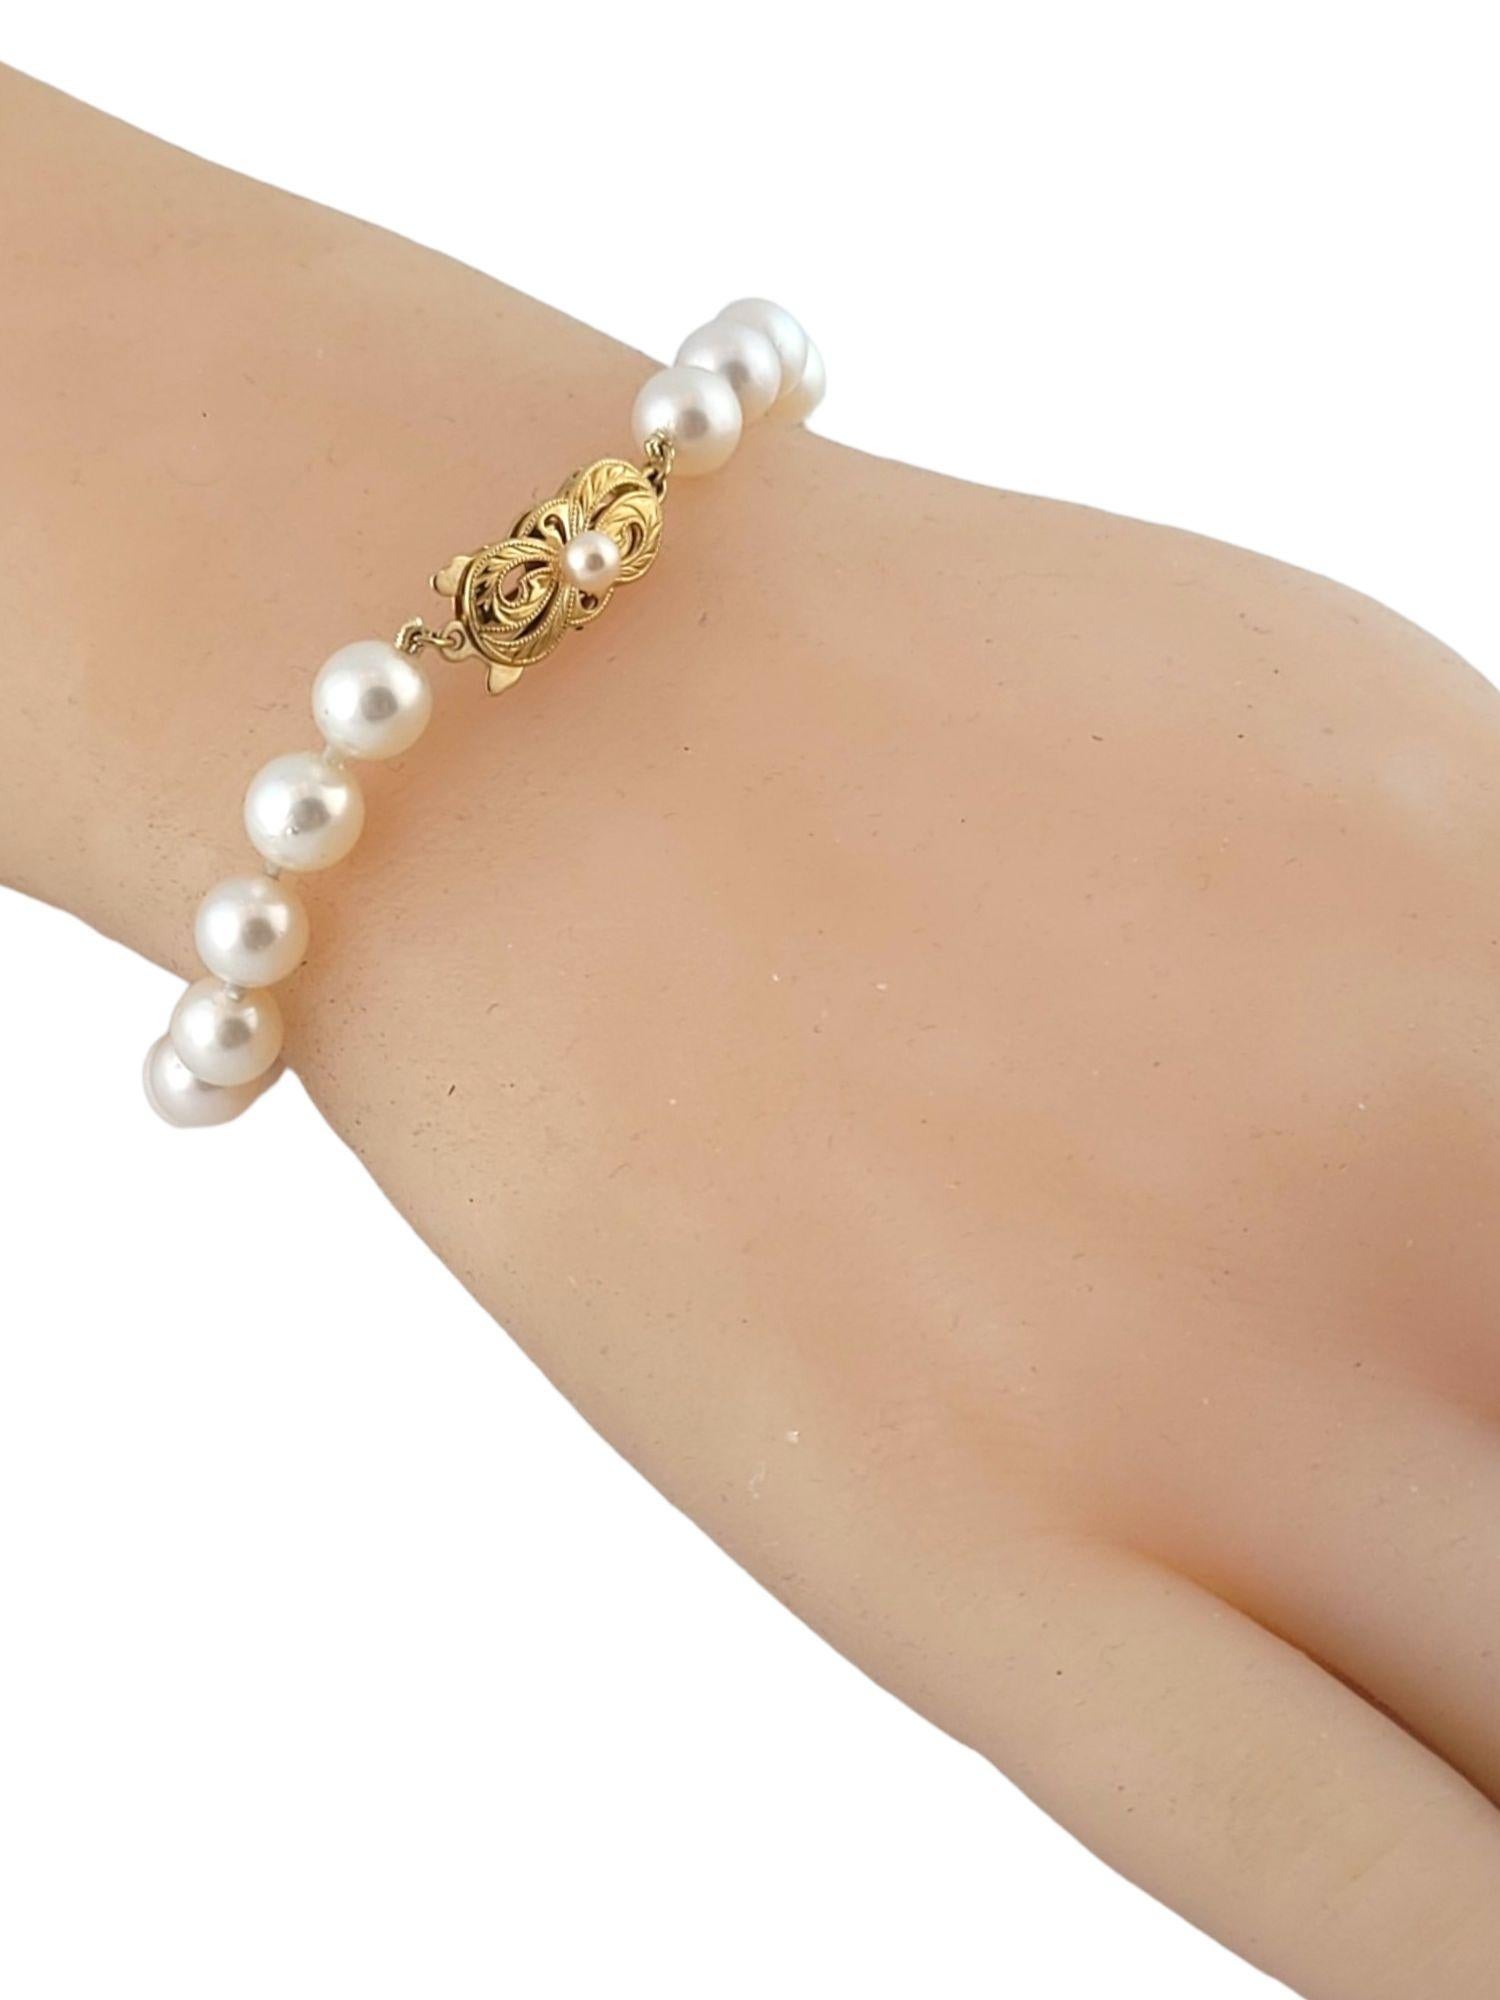 Mikimoto 18K Yellow Gold Cultured Pearl Bracelet 7.5mm #14918 1